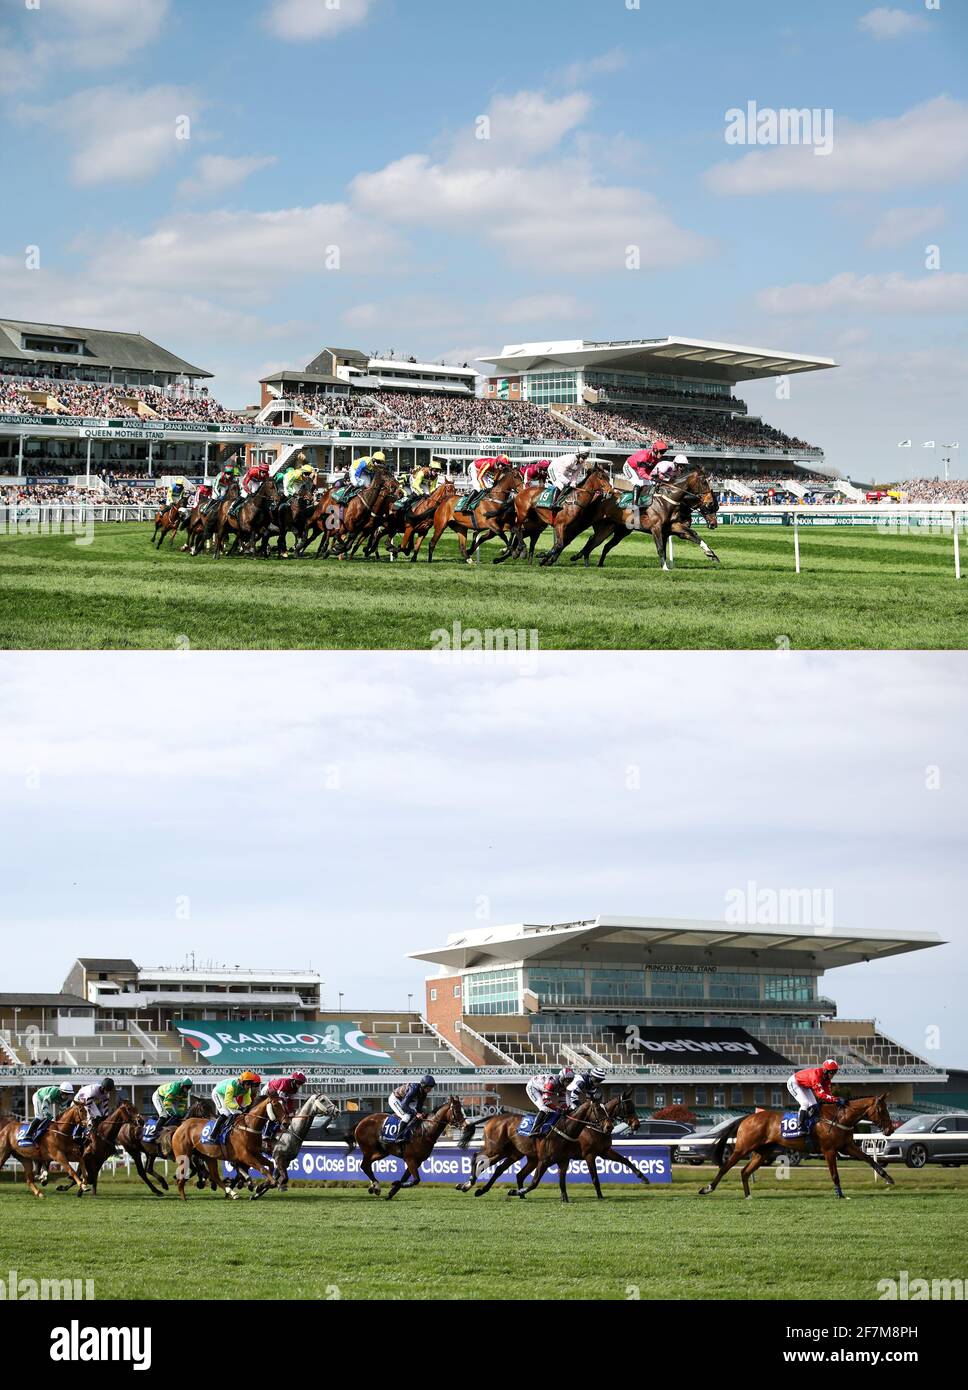 Composite photo dated 14-04-2018 (top) of runners and riders during the Gaskells Handicap Hurdle during Grand National Day of the 2018 Randox Health Grand National Festival at Aintree Racecourse, Liverpool, dates 14 April, 20218. And dated 08-04-2021(bottom) of runners and riders in front of the empty concourse in the Close Brothers Red Rum Handicap Chase during the Liverpool NHS Day of the 2021 Randox Health Grand National Festival at Aintree Racecourse, Liverpool. Picture date: Thursday April 8, 2021. Stock Photo